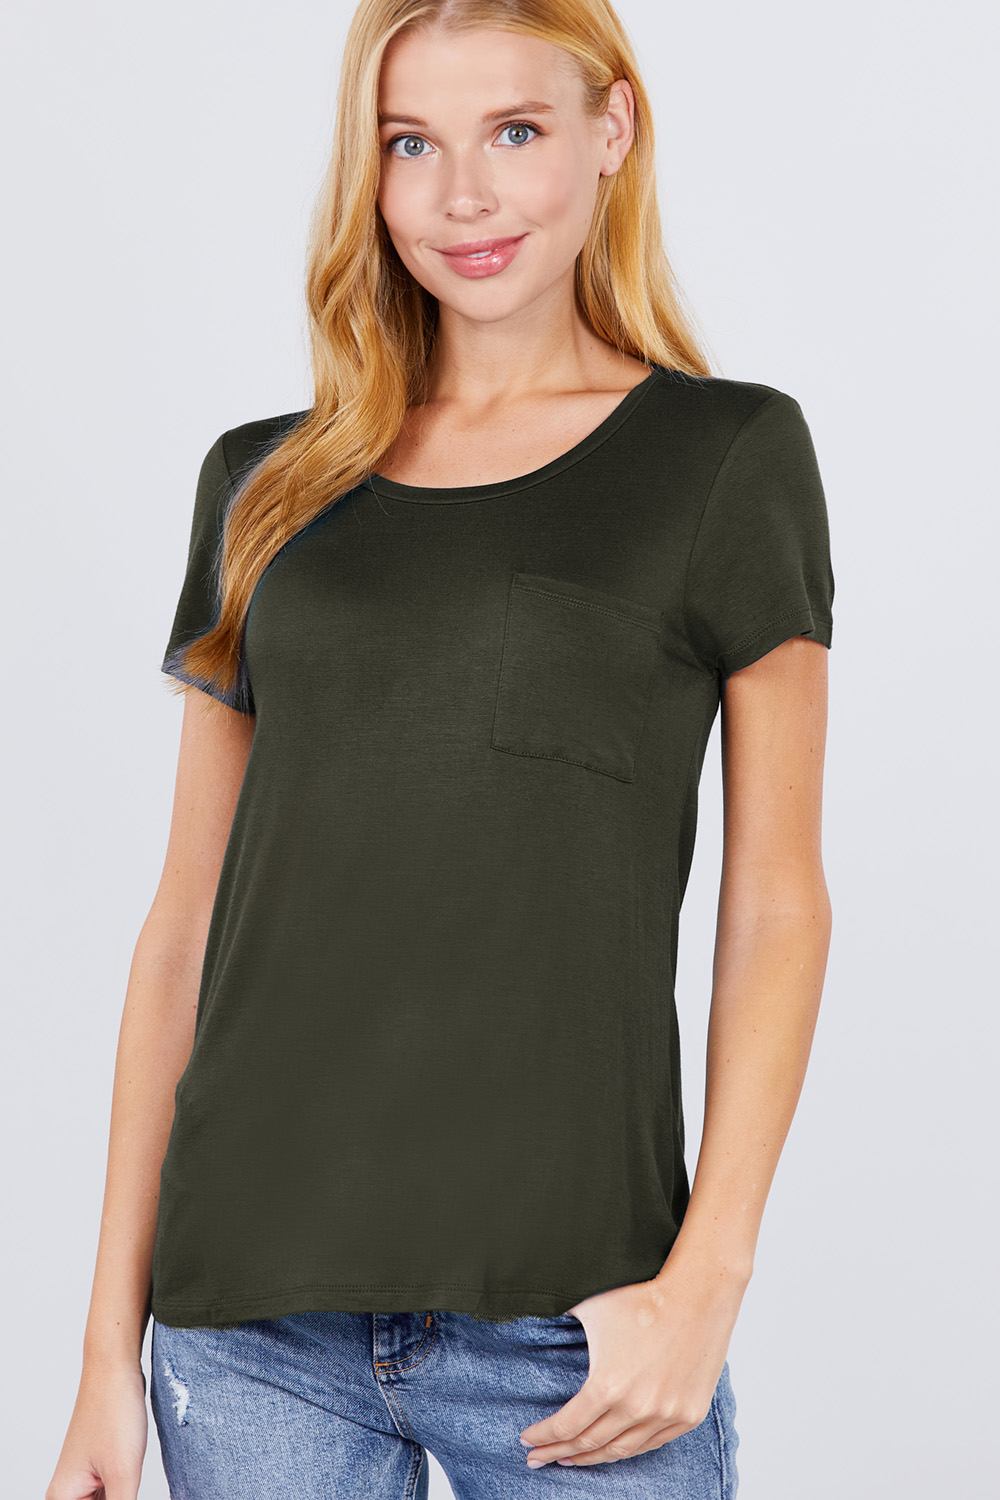 Short Sleeve Scoop Neck Top With Pocket - Fashion Quality Boutik